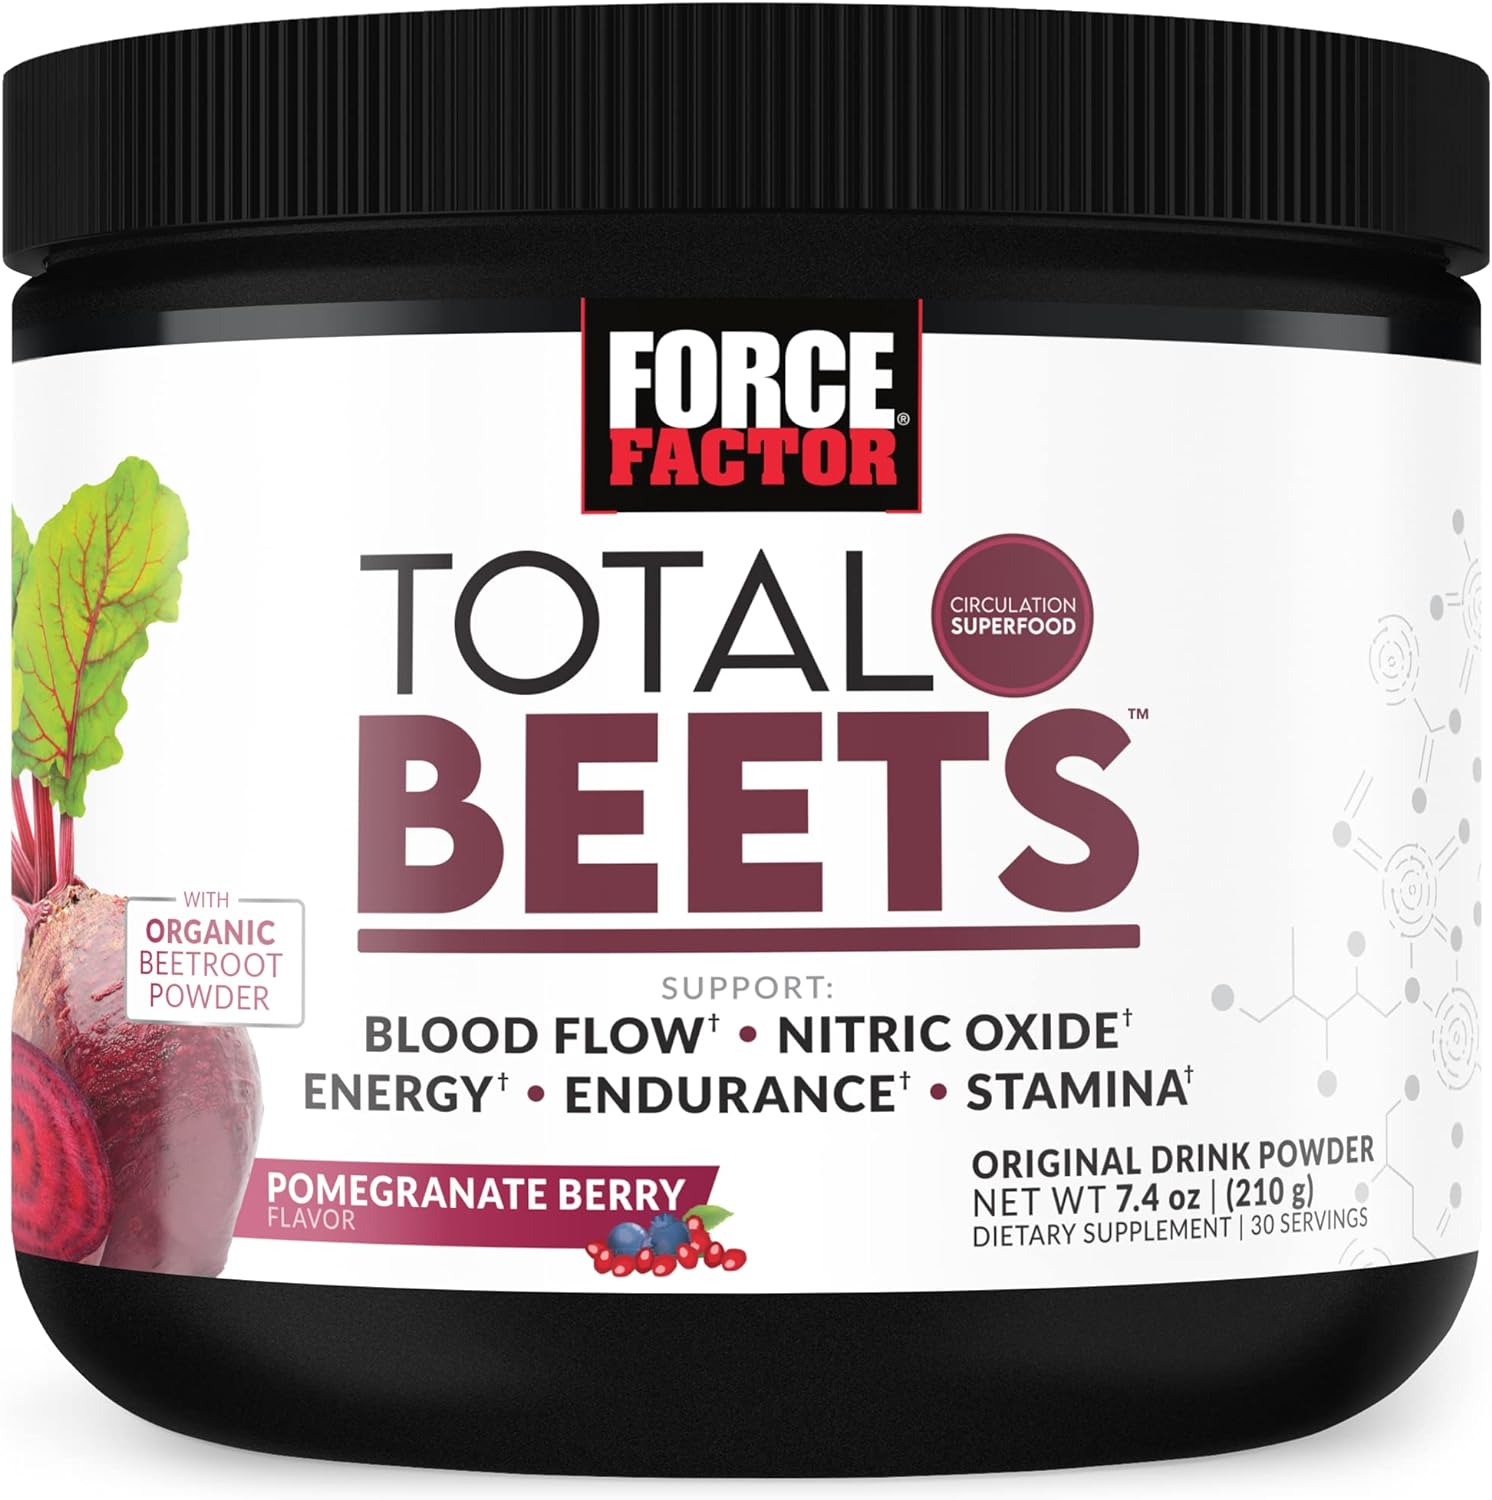 Force factor total beets